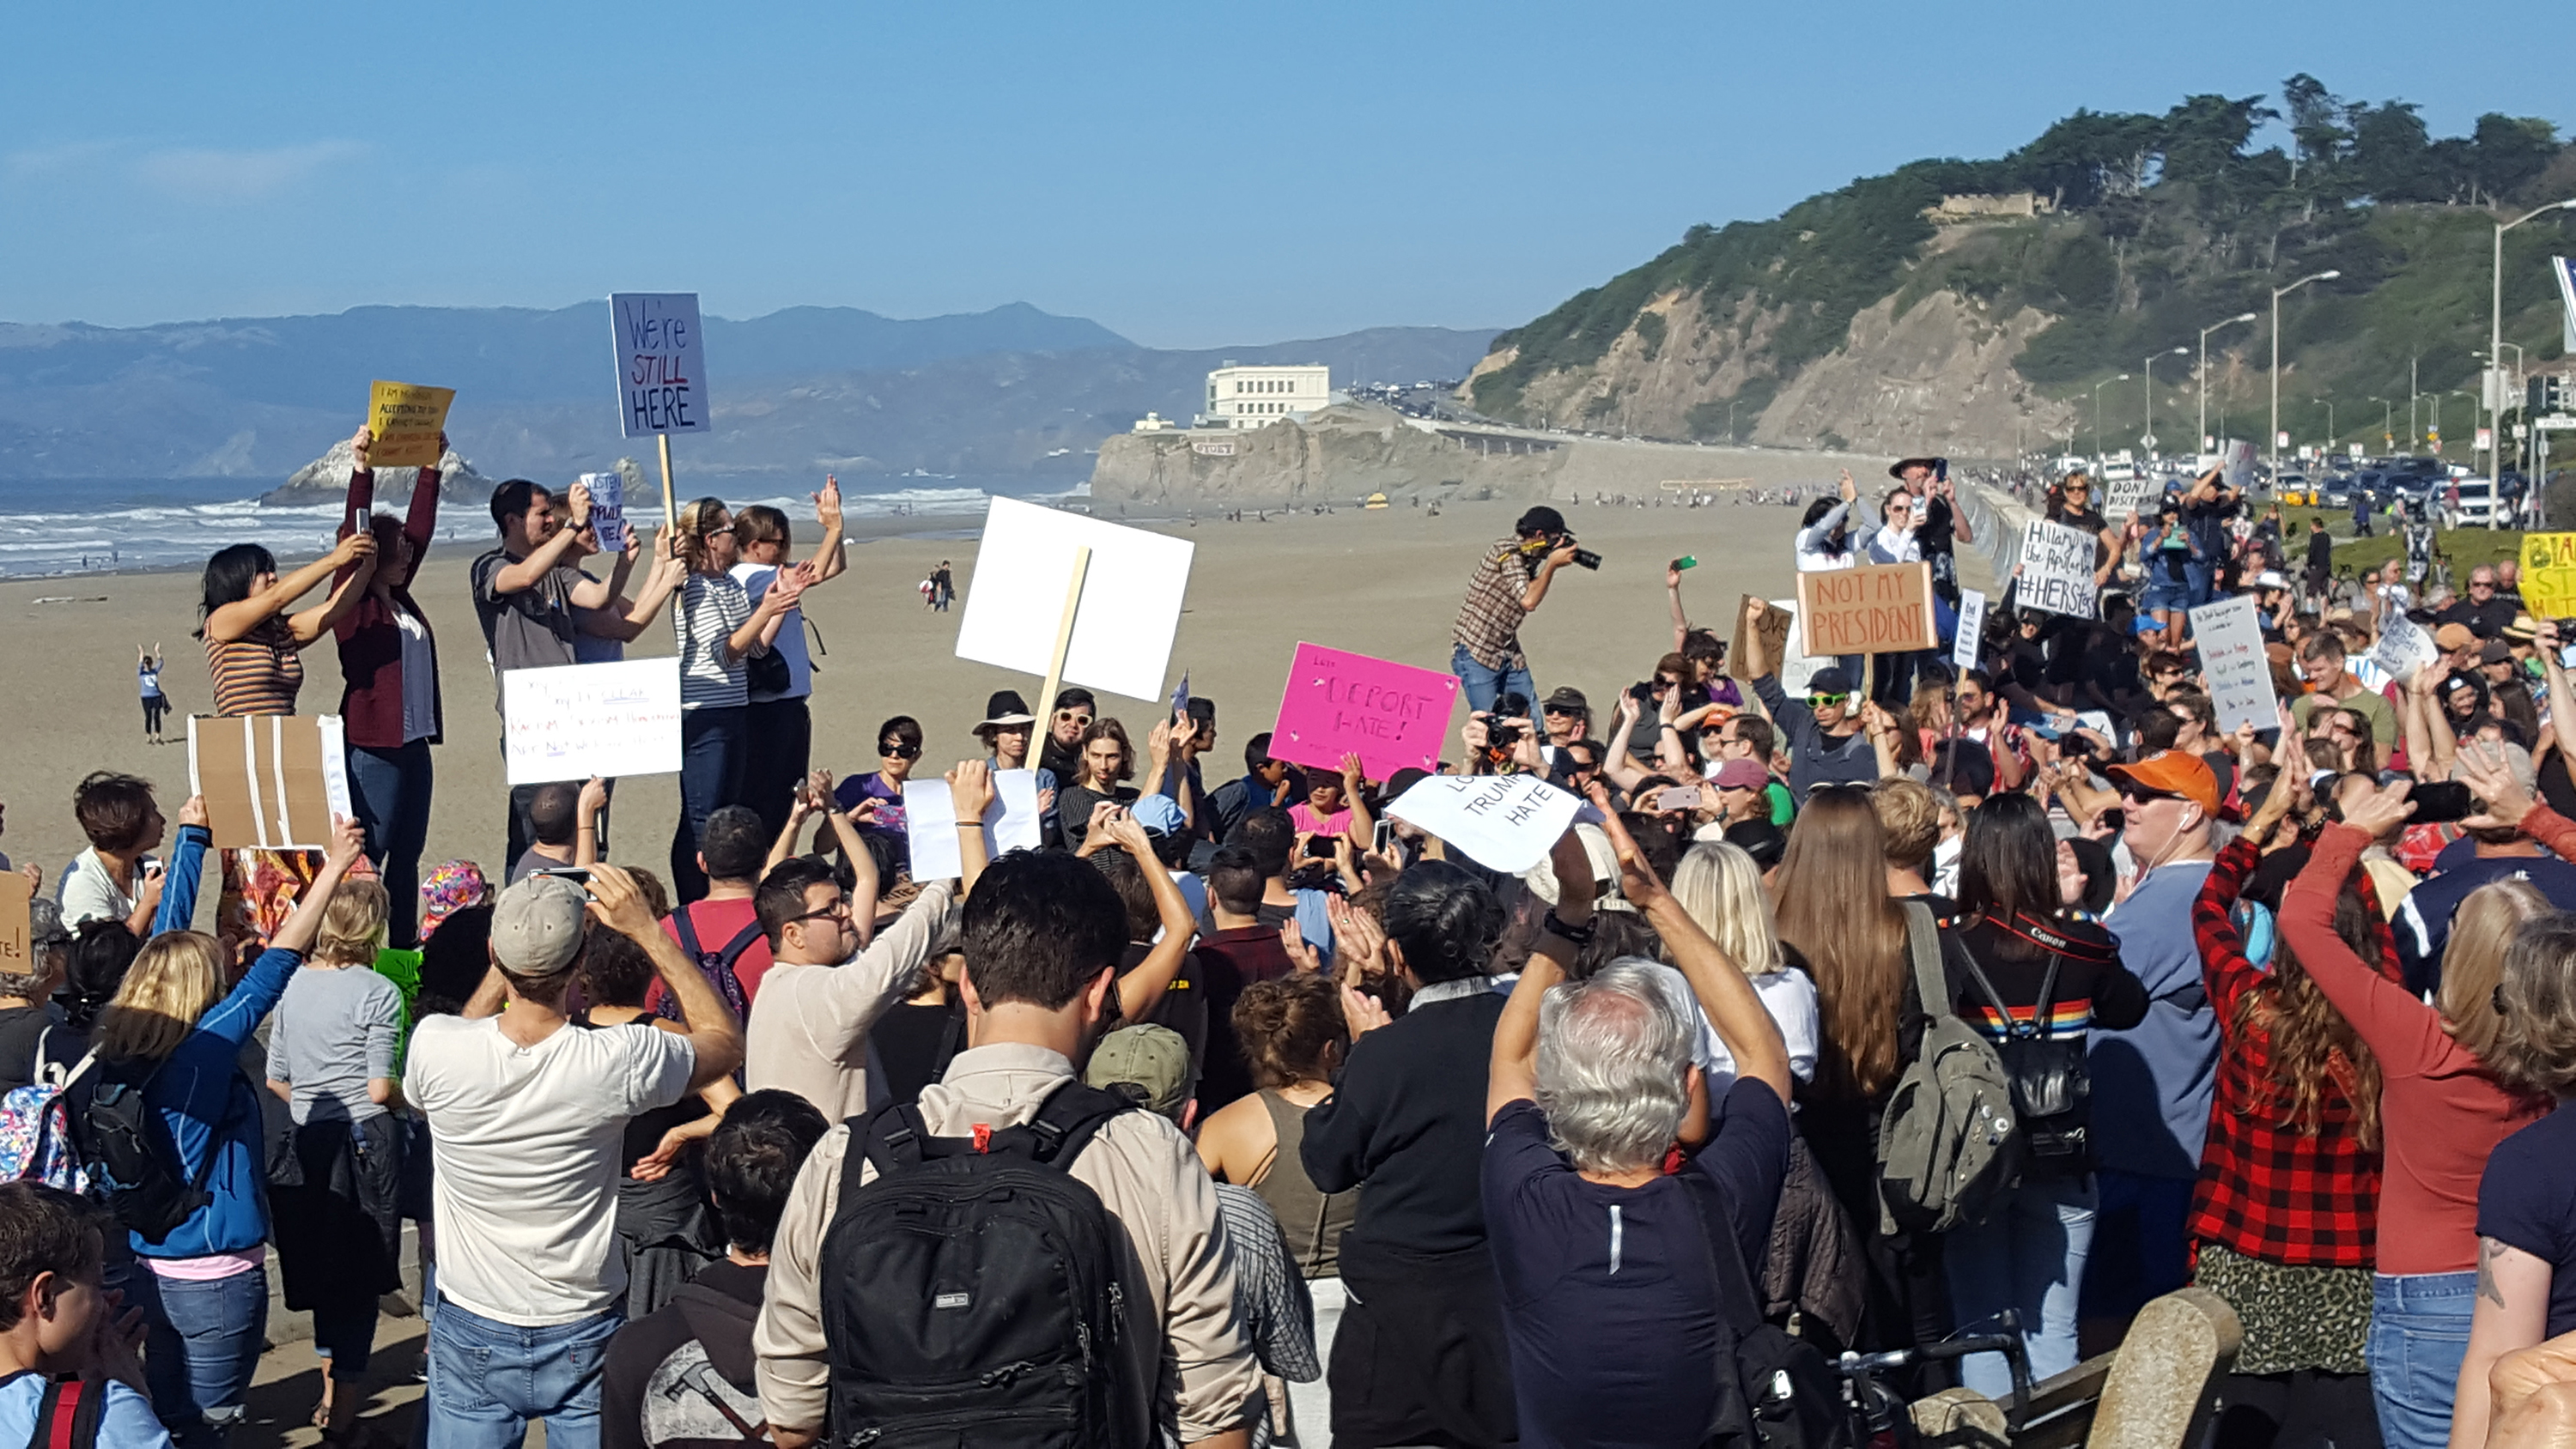 Finishing up with a brief rally on the Ocean Beach promenade.